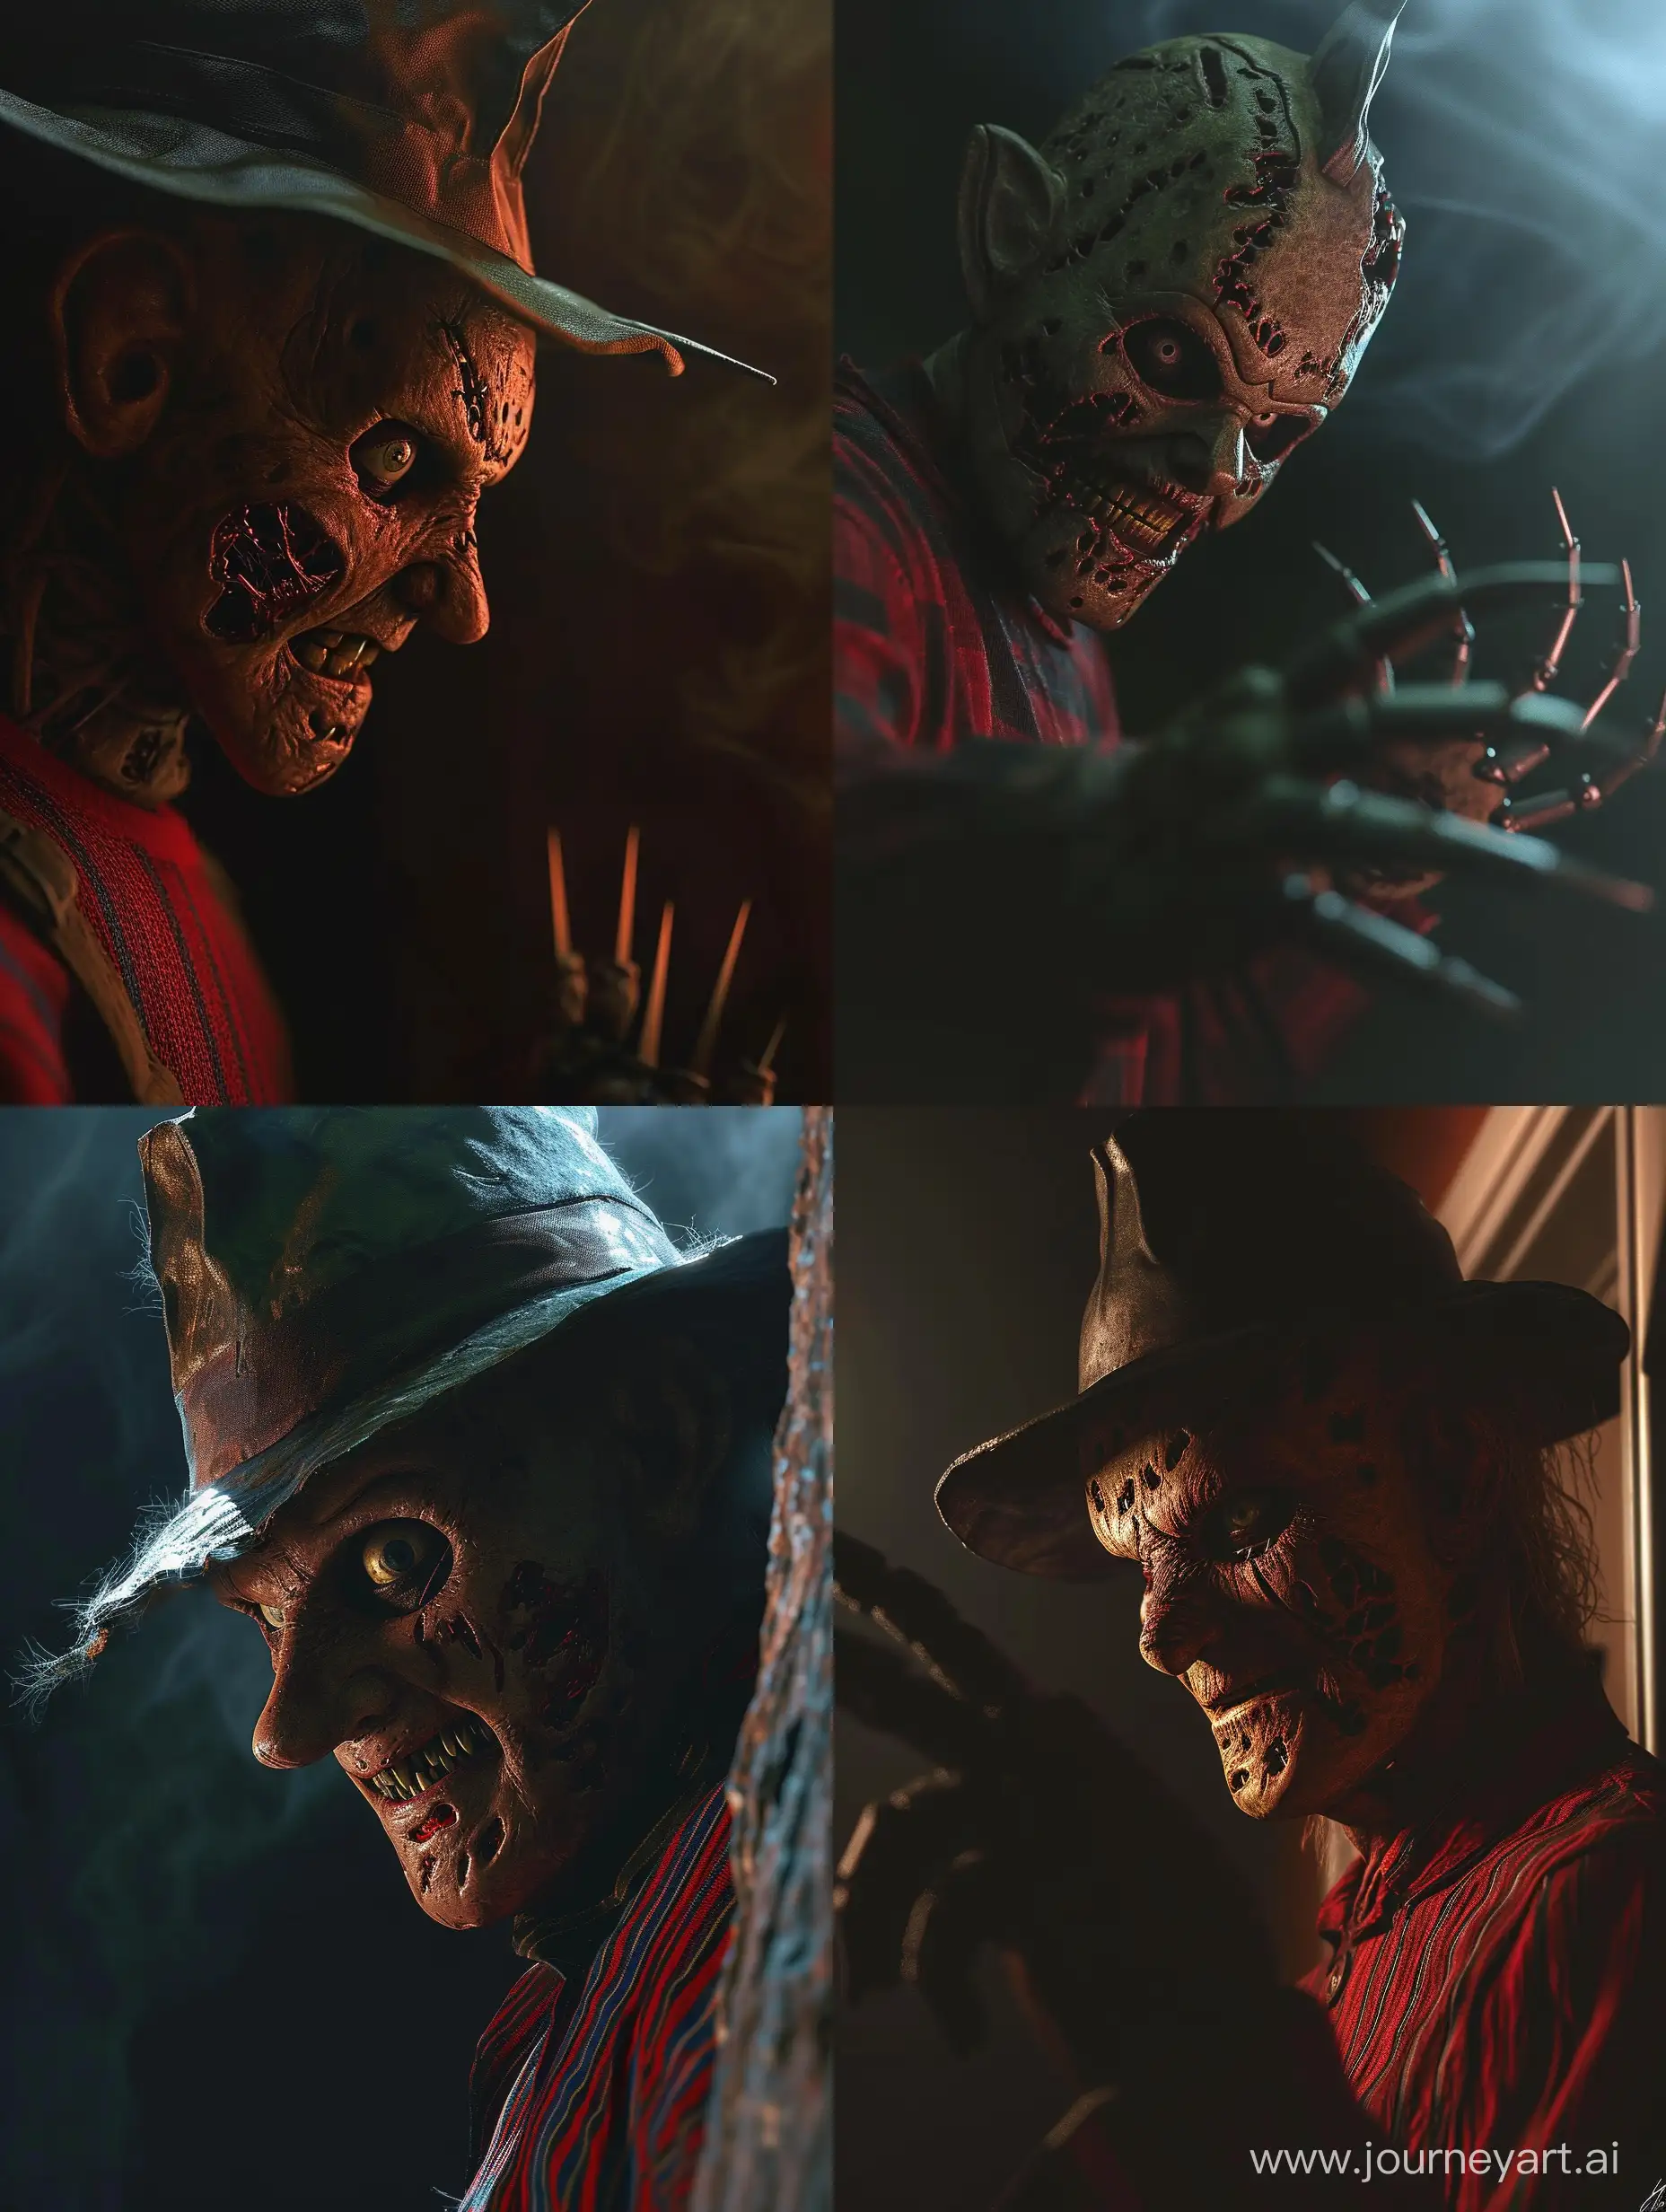 Freddy-Krueger-Emerges-from-the-Shadows-in-a-PhotoRealistic-Nightmare